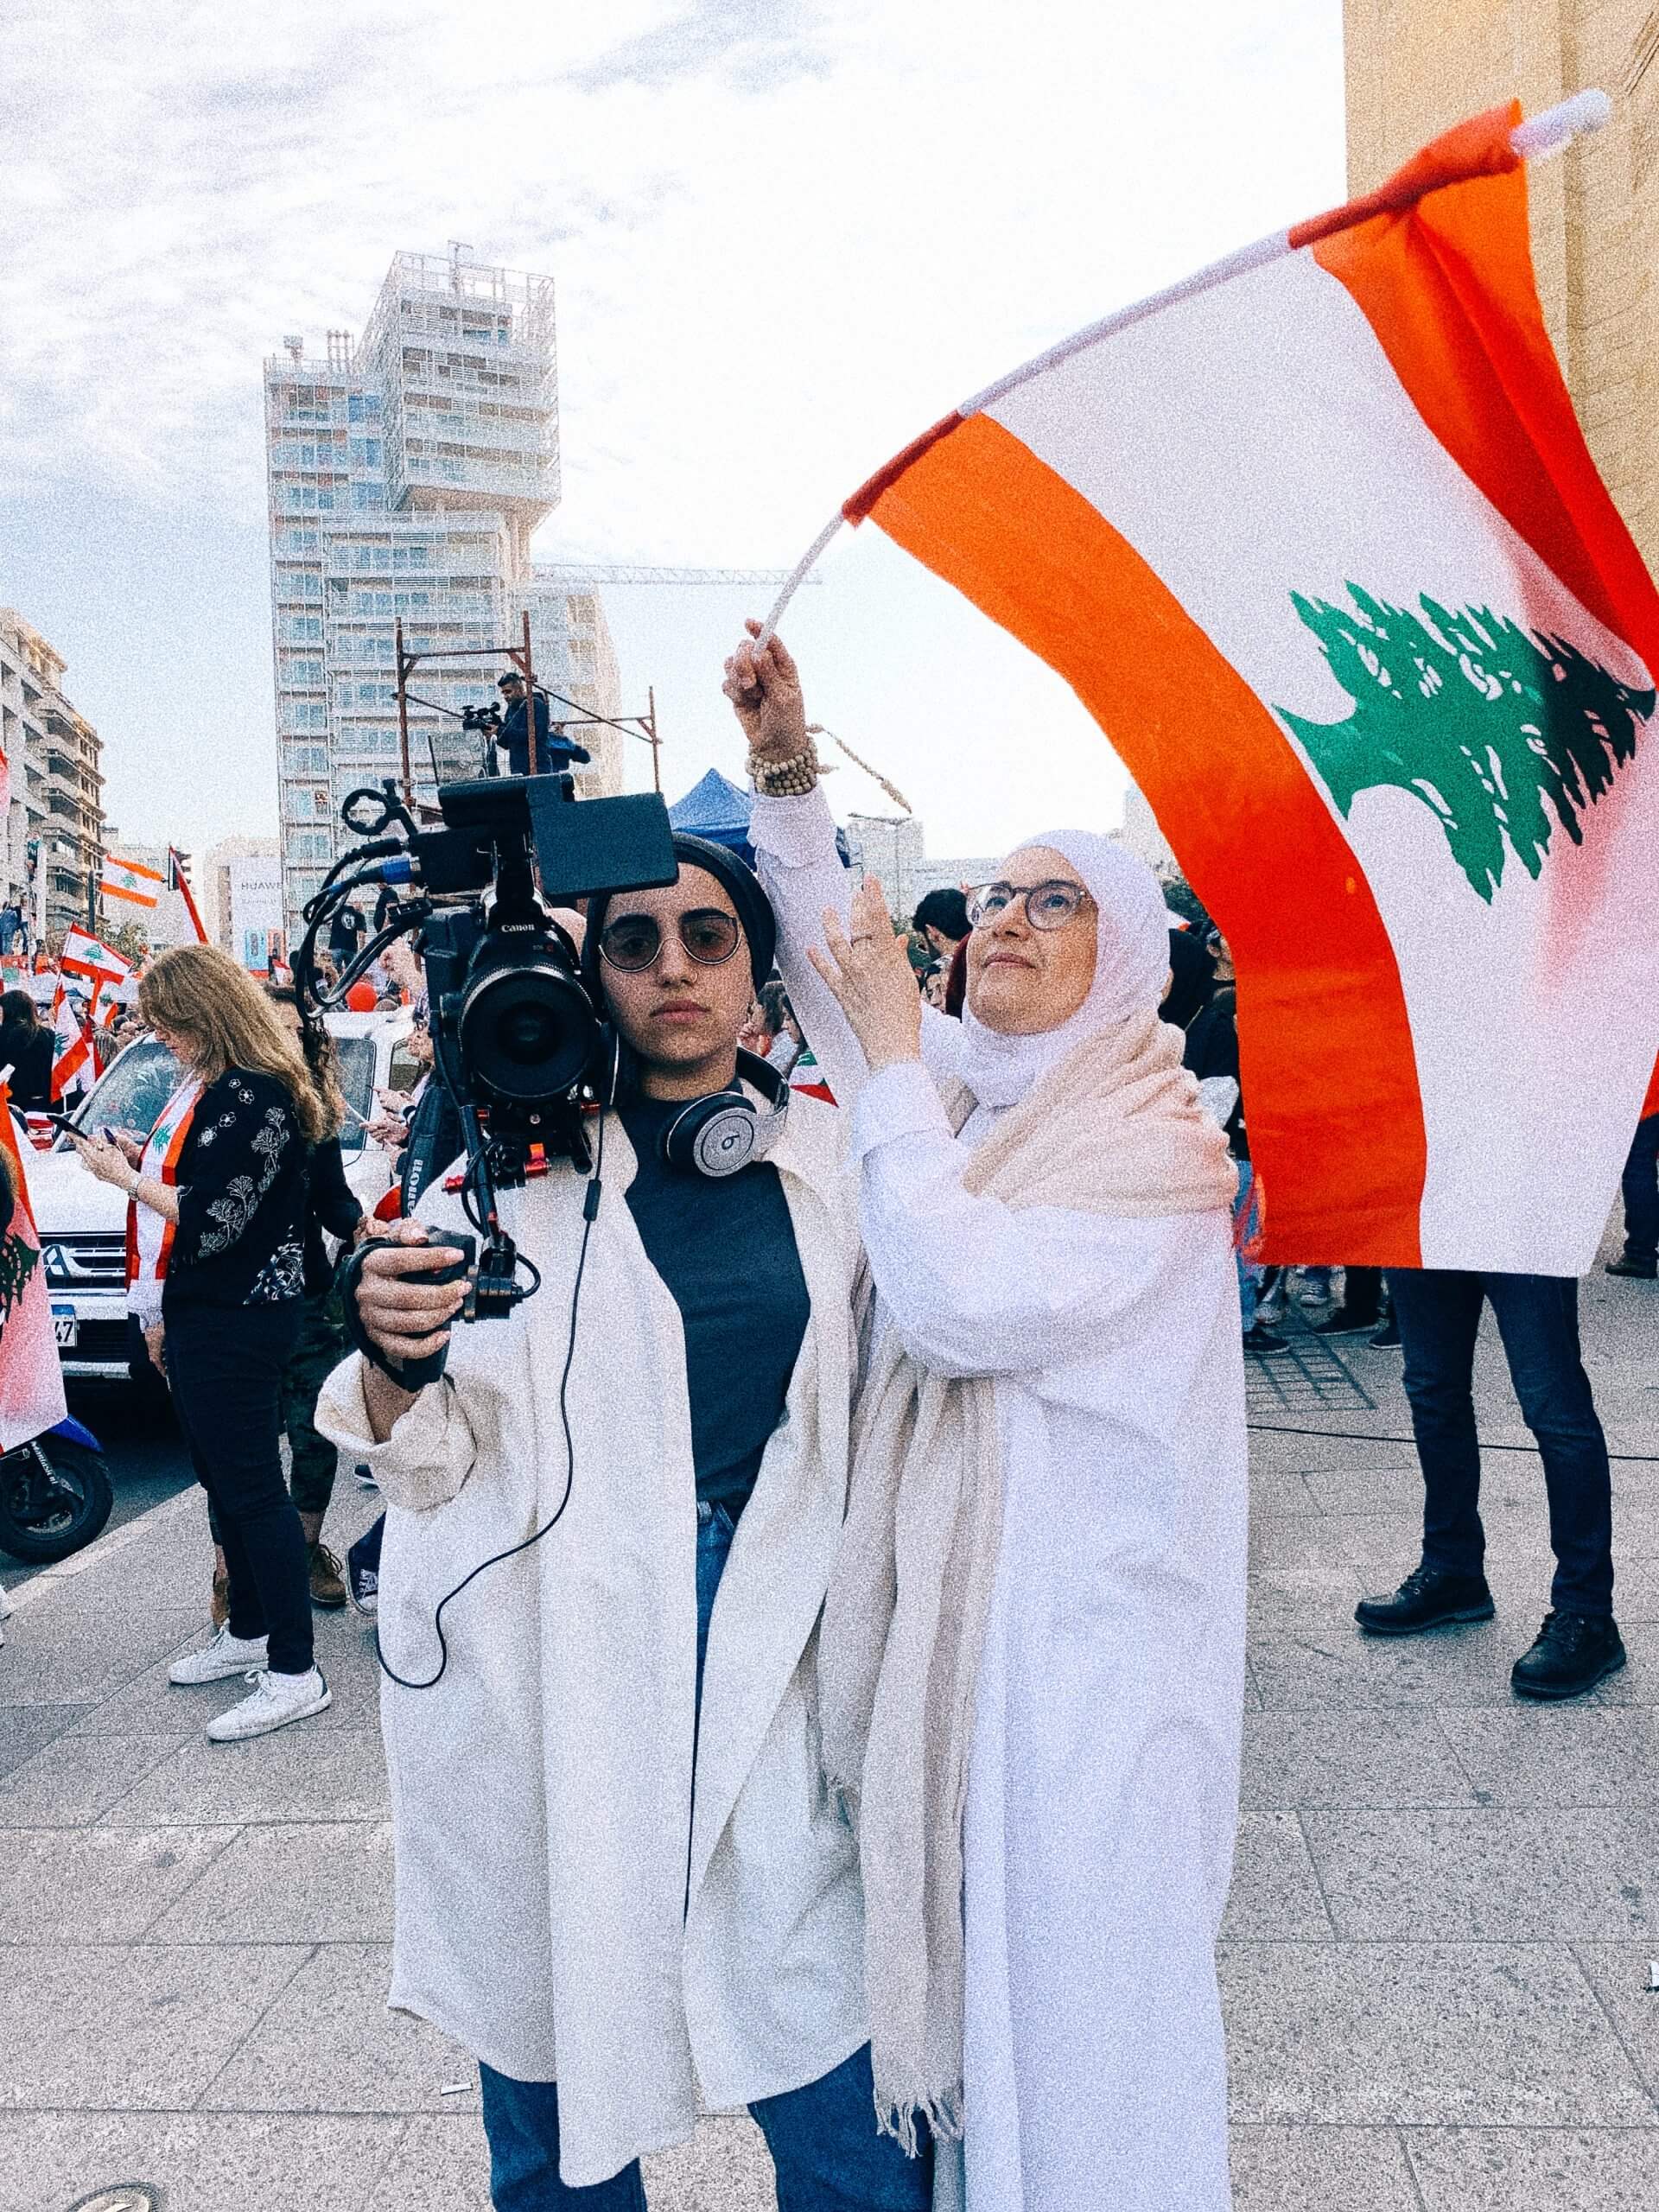 Still from Q. Filmmaker Jude Chehab is wearing sunglasses and is standing outside holding a camera over her shoulder standing next to a woman wearing glasses and a hijab, waving the flag of Lebanon, which is red and white with a green pine tree in the center.